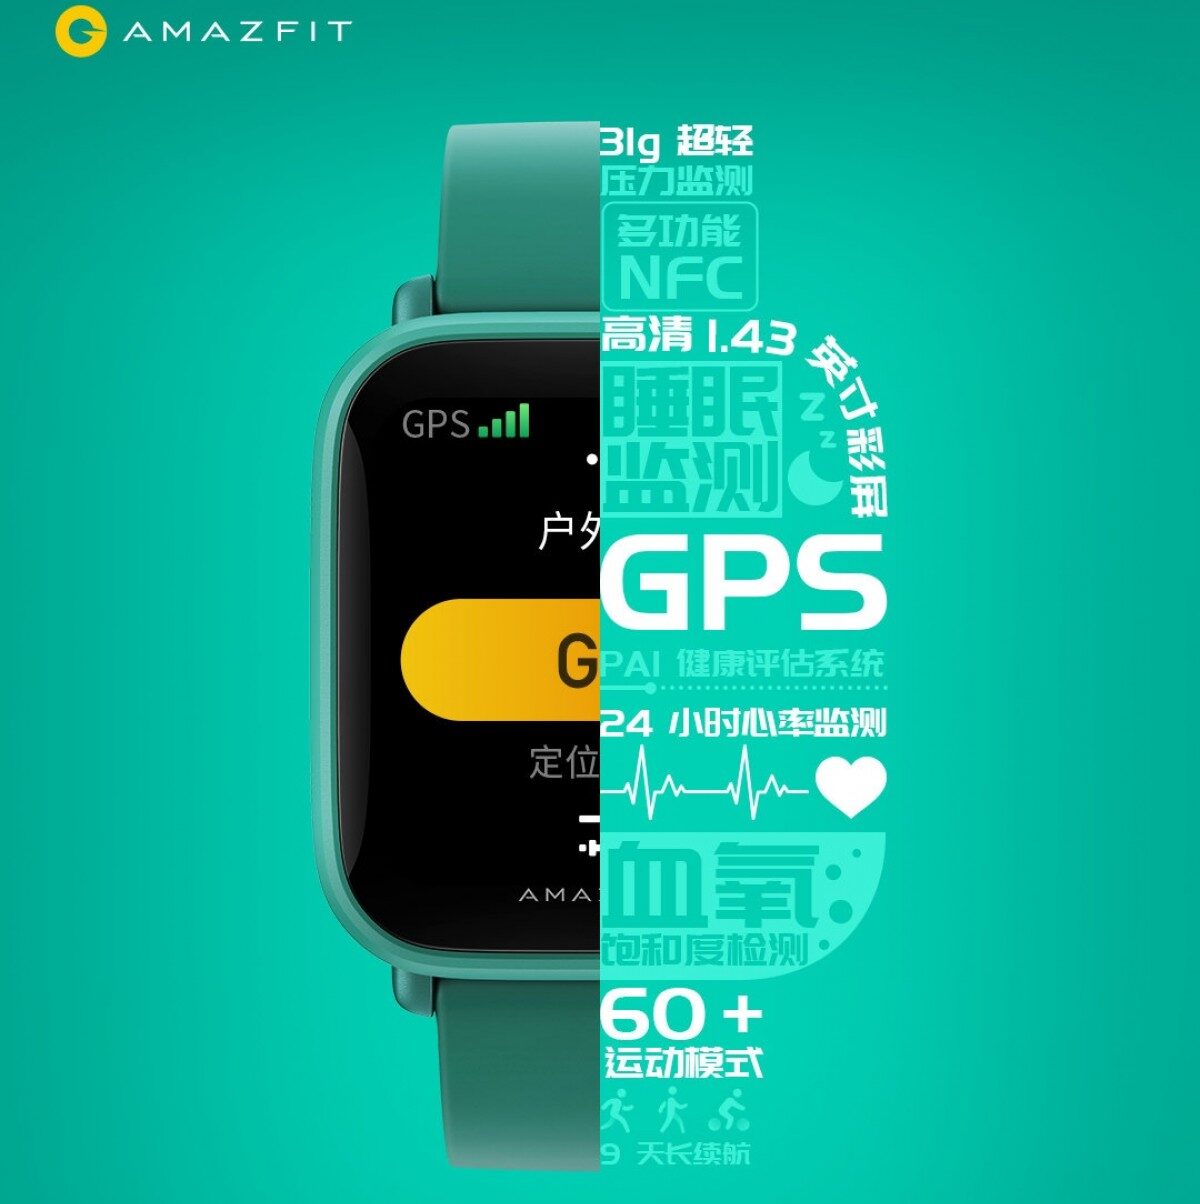 Amazfit Pop Pro key specs and December 1 launch date teased